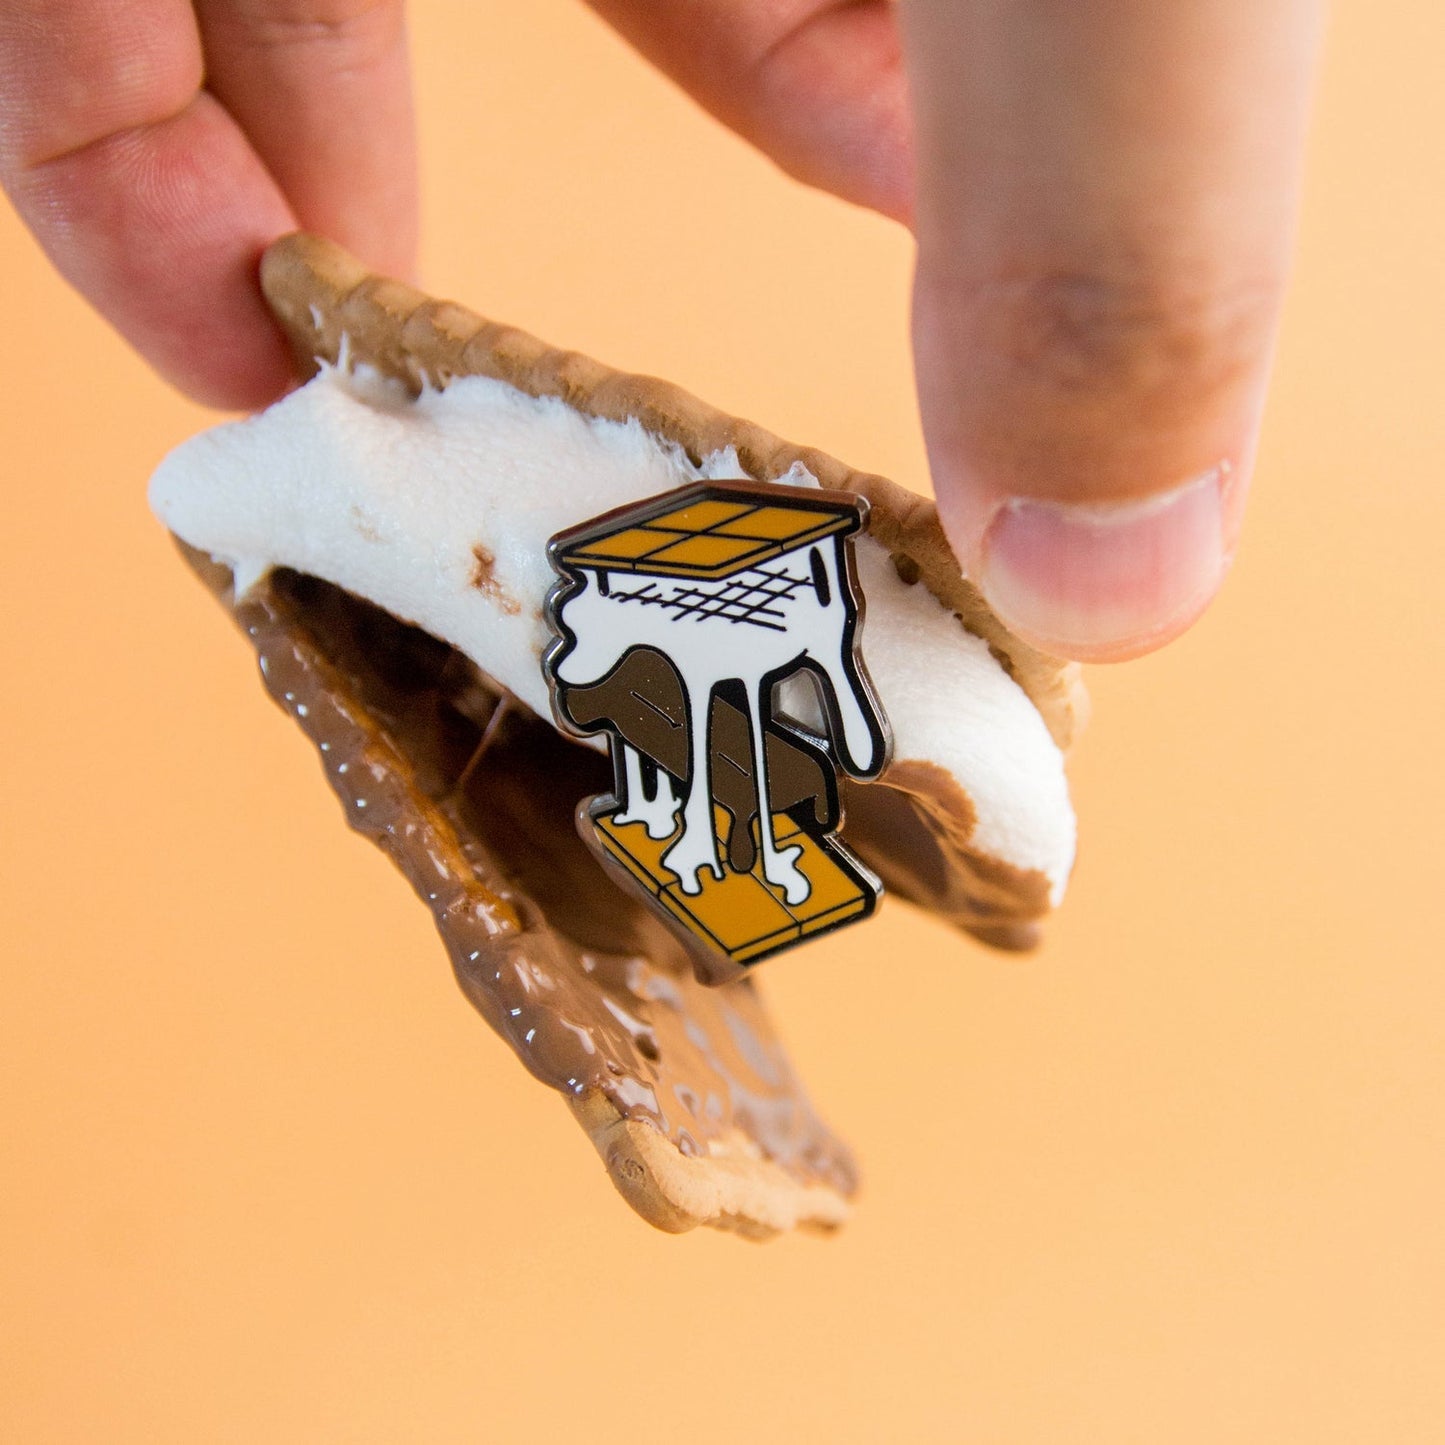 S'mores Food Frenzy Enamel Pin by Really Good Pins